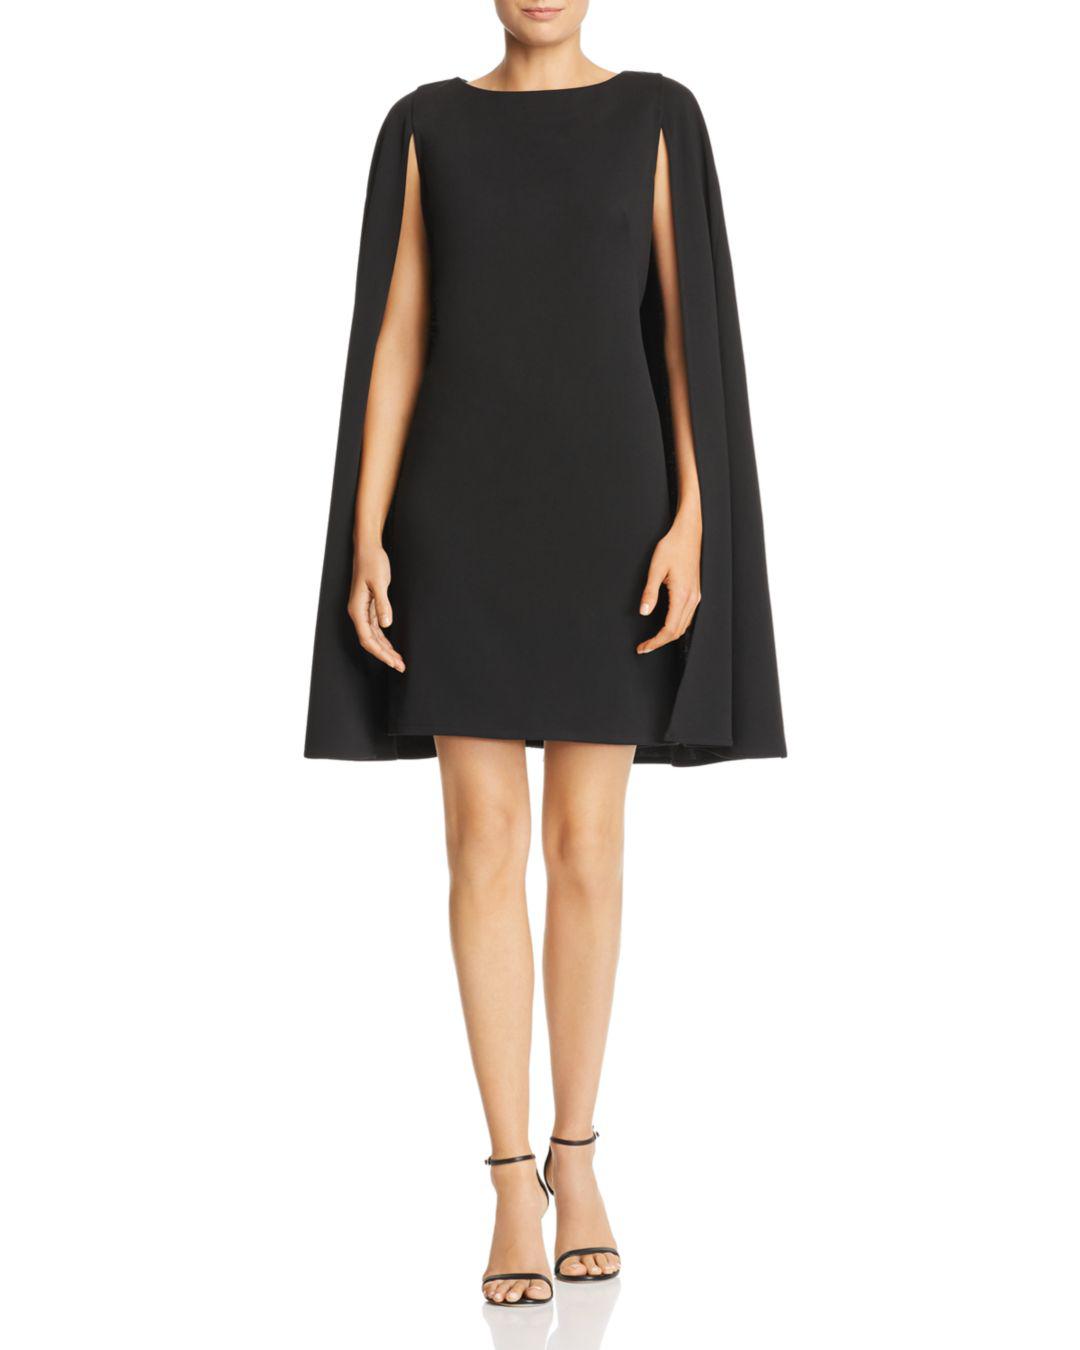 Adrianna Papell Cape Overlay Dress in Black - Lyst